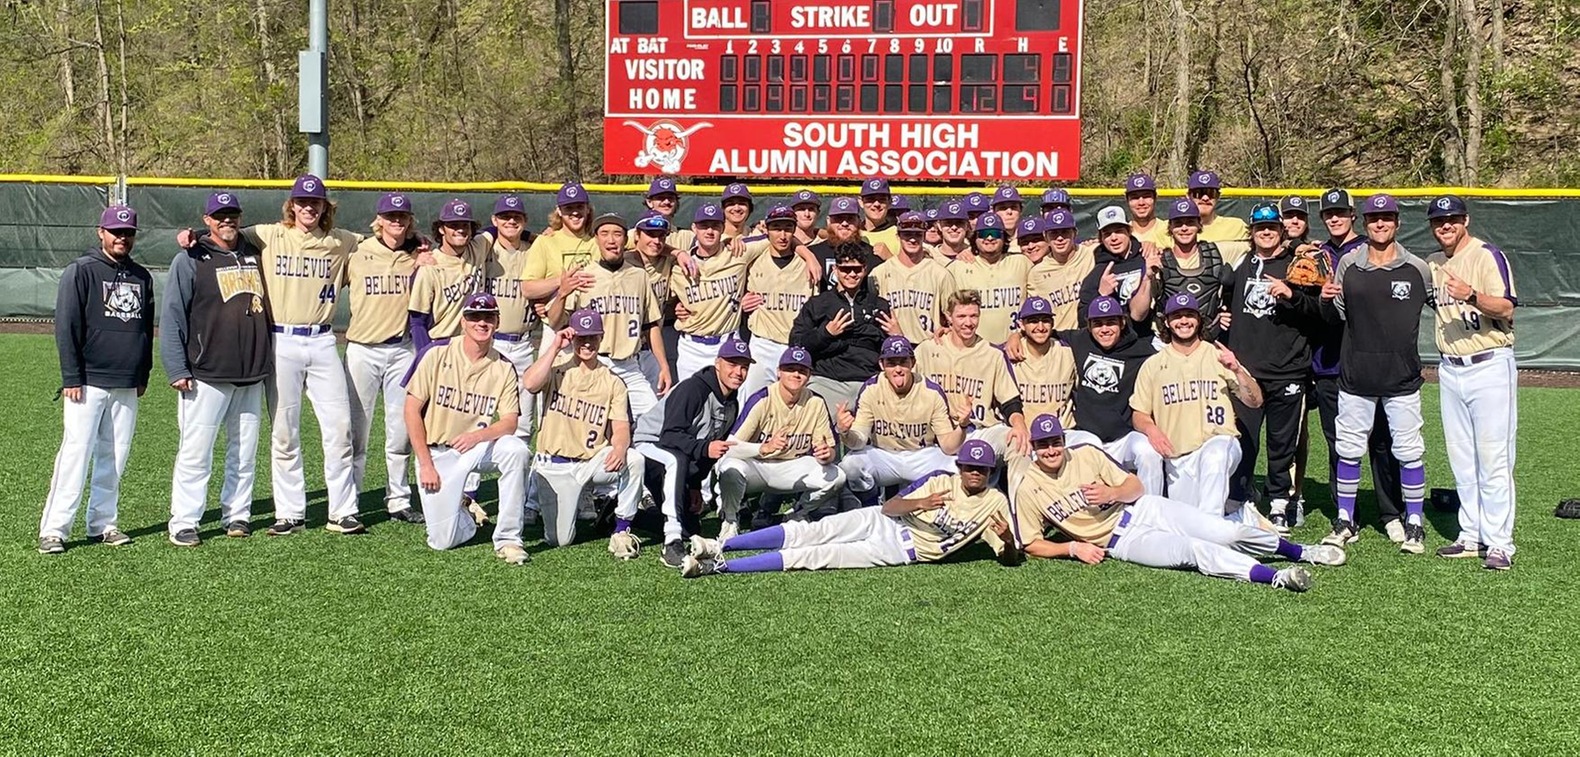 Bruins sweep Trojans in DH to win series, NSAA title